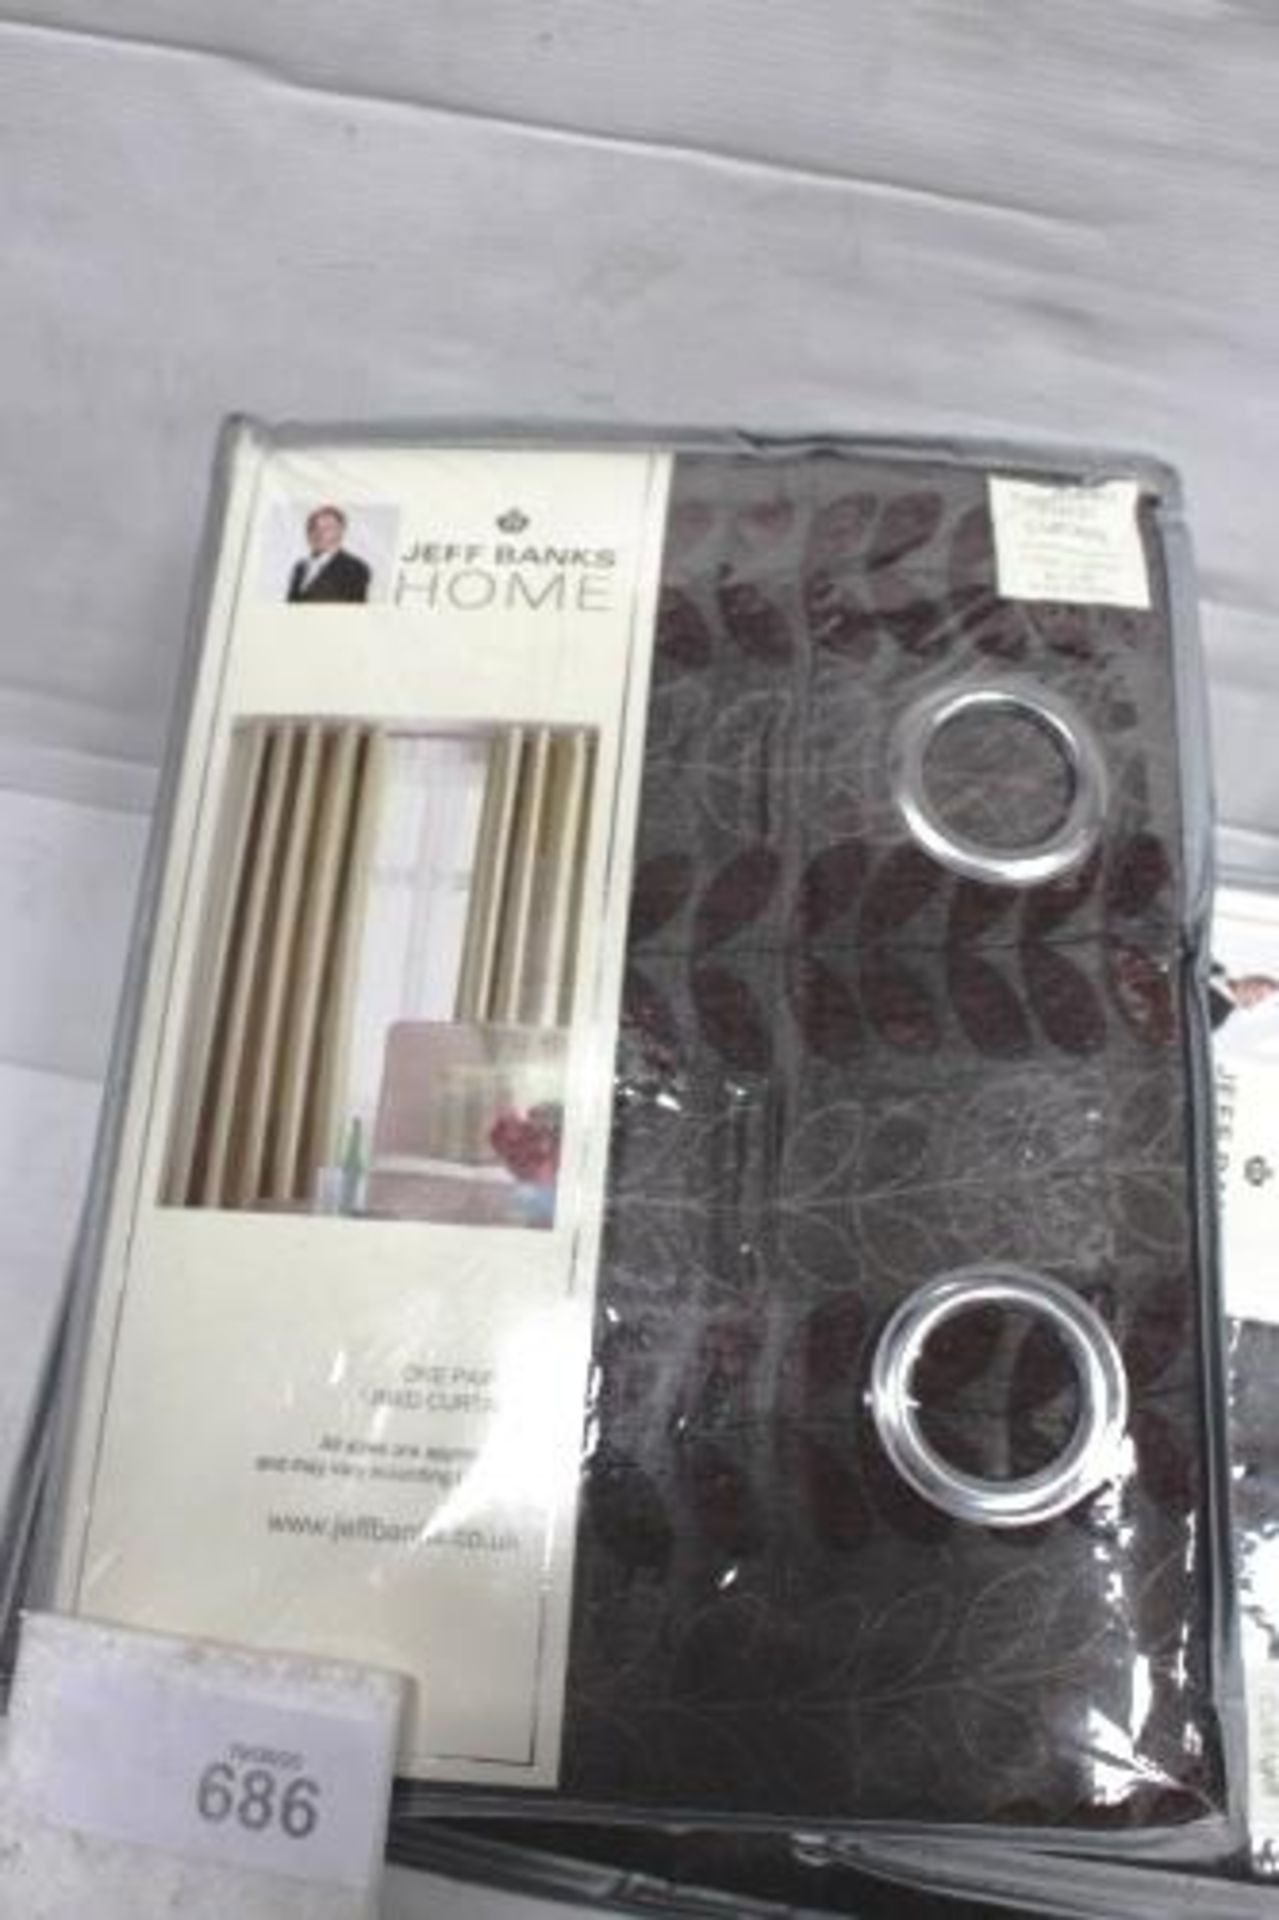 8 x pairs of Jeff Banks Home Sierra lined RME choc lined curtains, size 117 x 137cm - New in pack, - Image 2 of 3